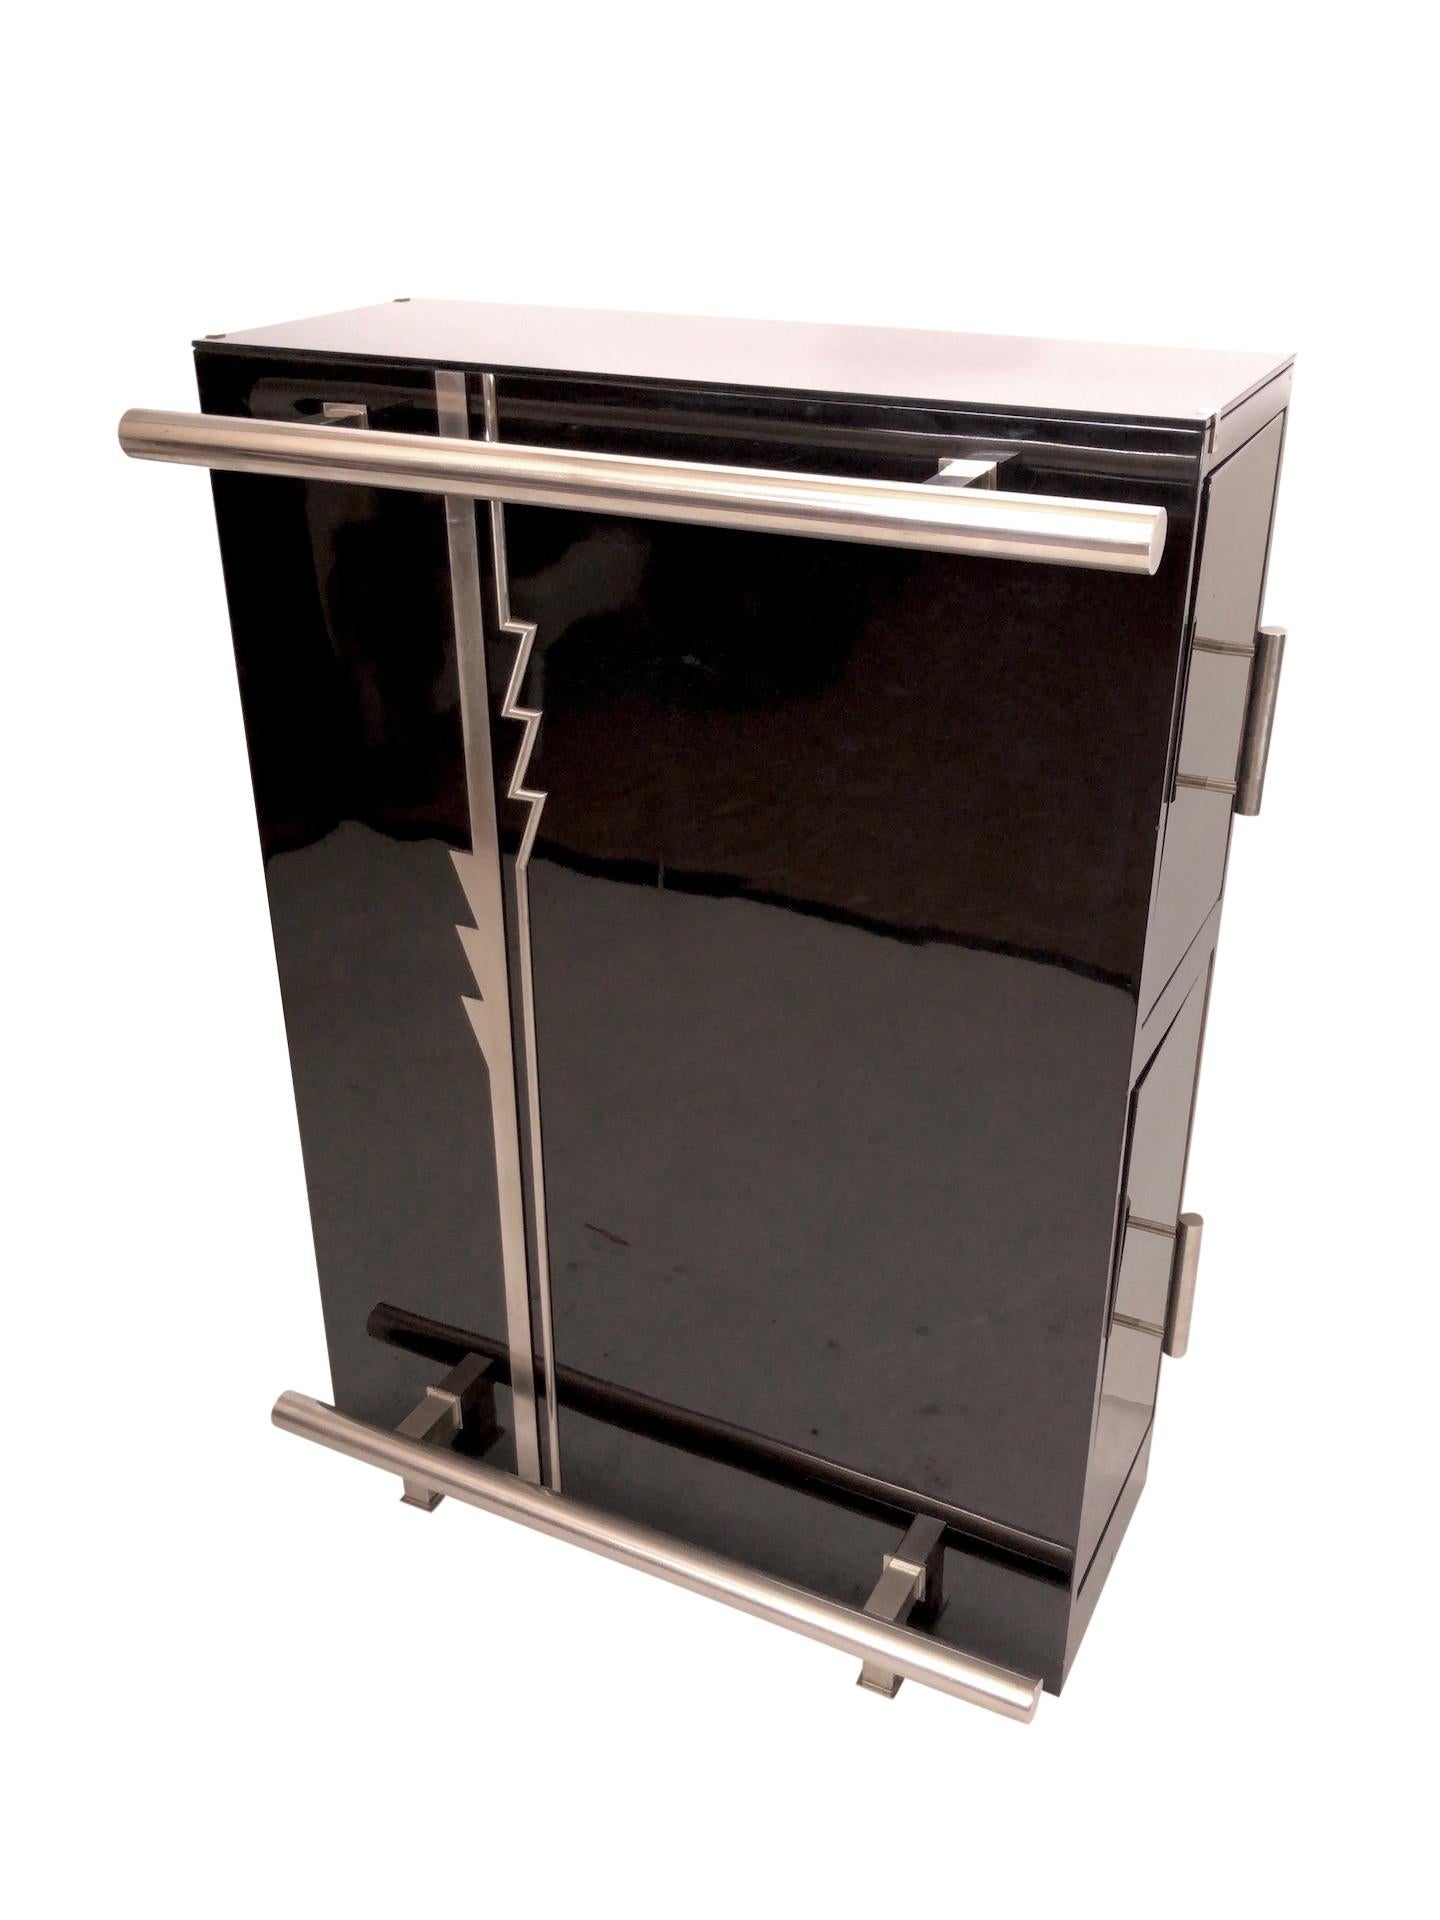 Metal Art Deco pattern in front of this dry bar furniture
Black piano lacquer 
Nickeled metal 
The black glass top is the perfect protection against alcohol and liquids. 
on both sides with drawers 

Place it directly on the wall and one or